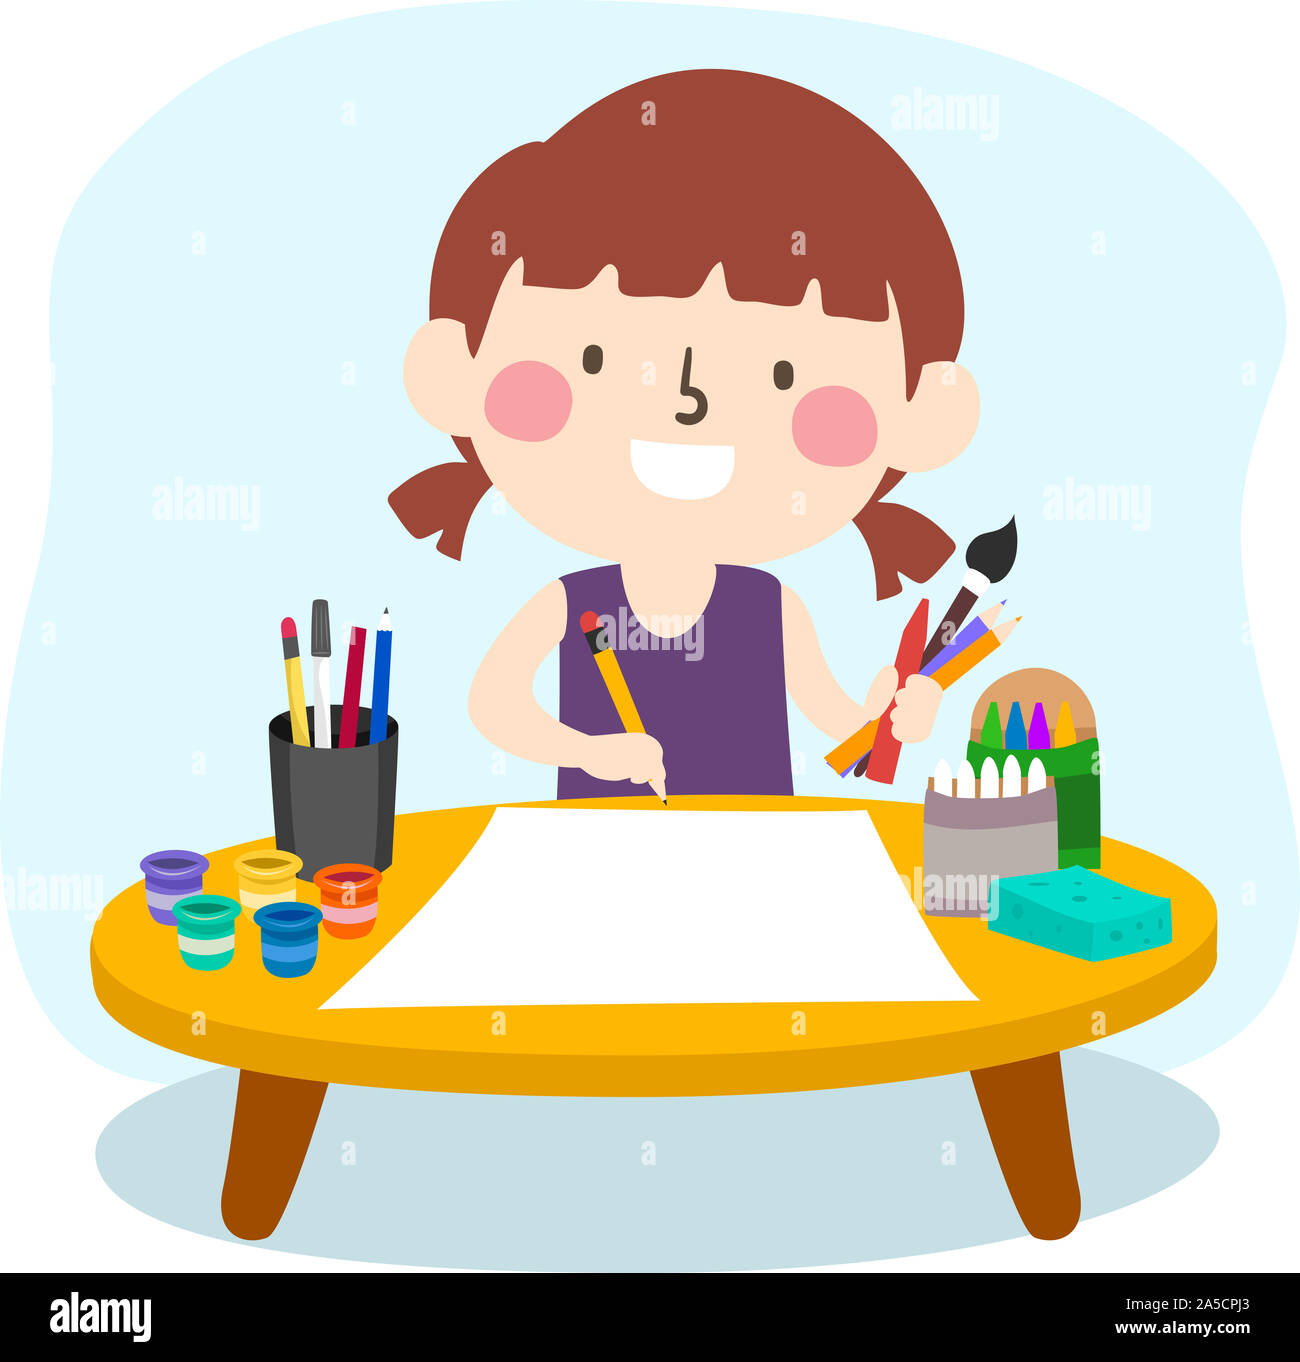 Illustration of a Kid Girl Trying Different Art Mediums from Pencil to Paint Stock Photo